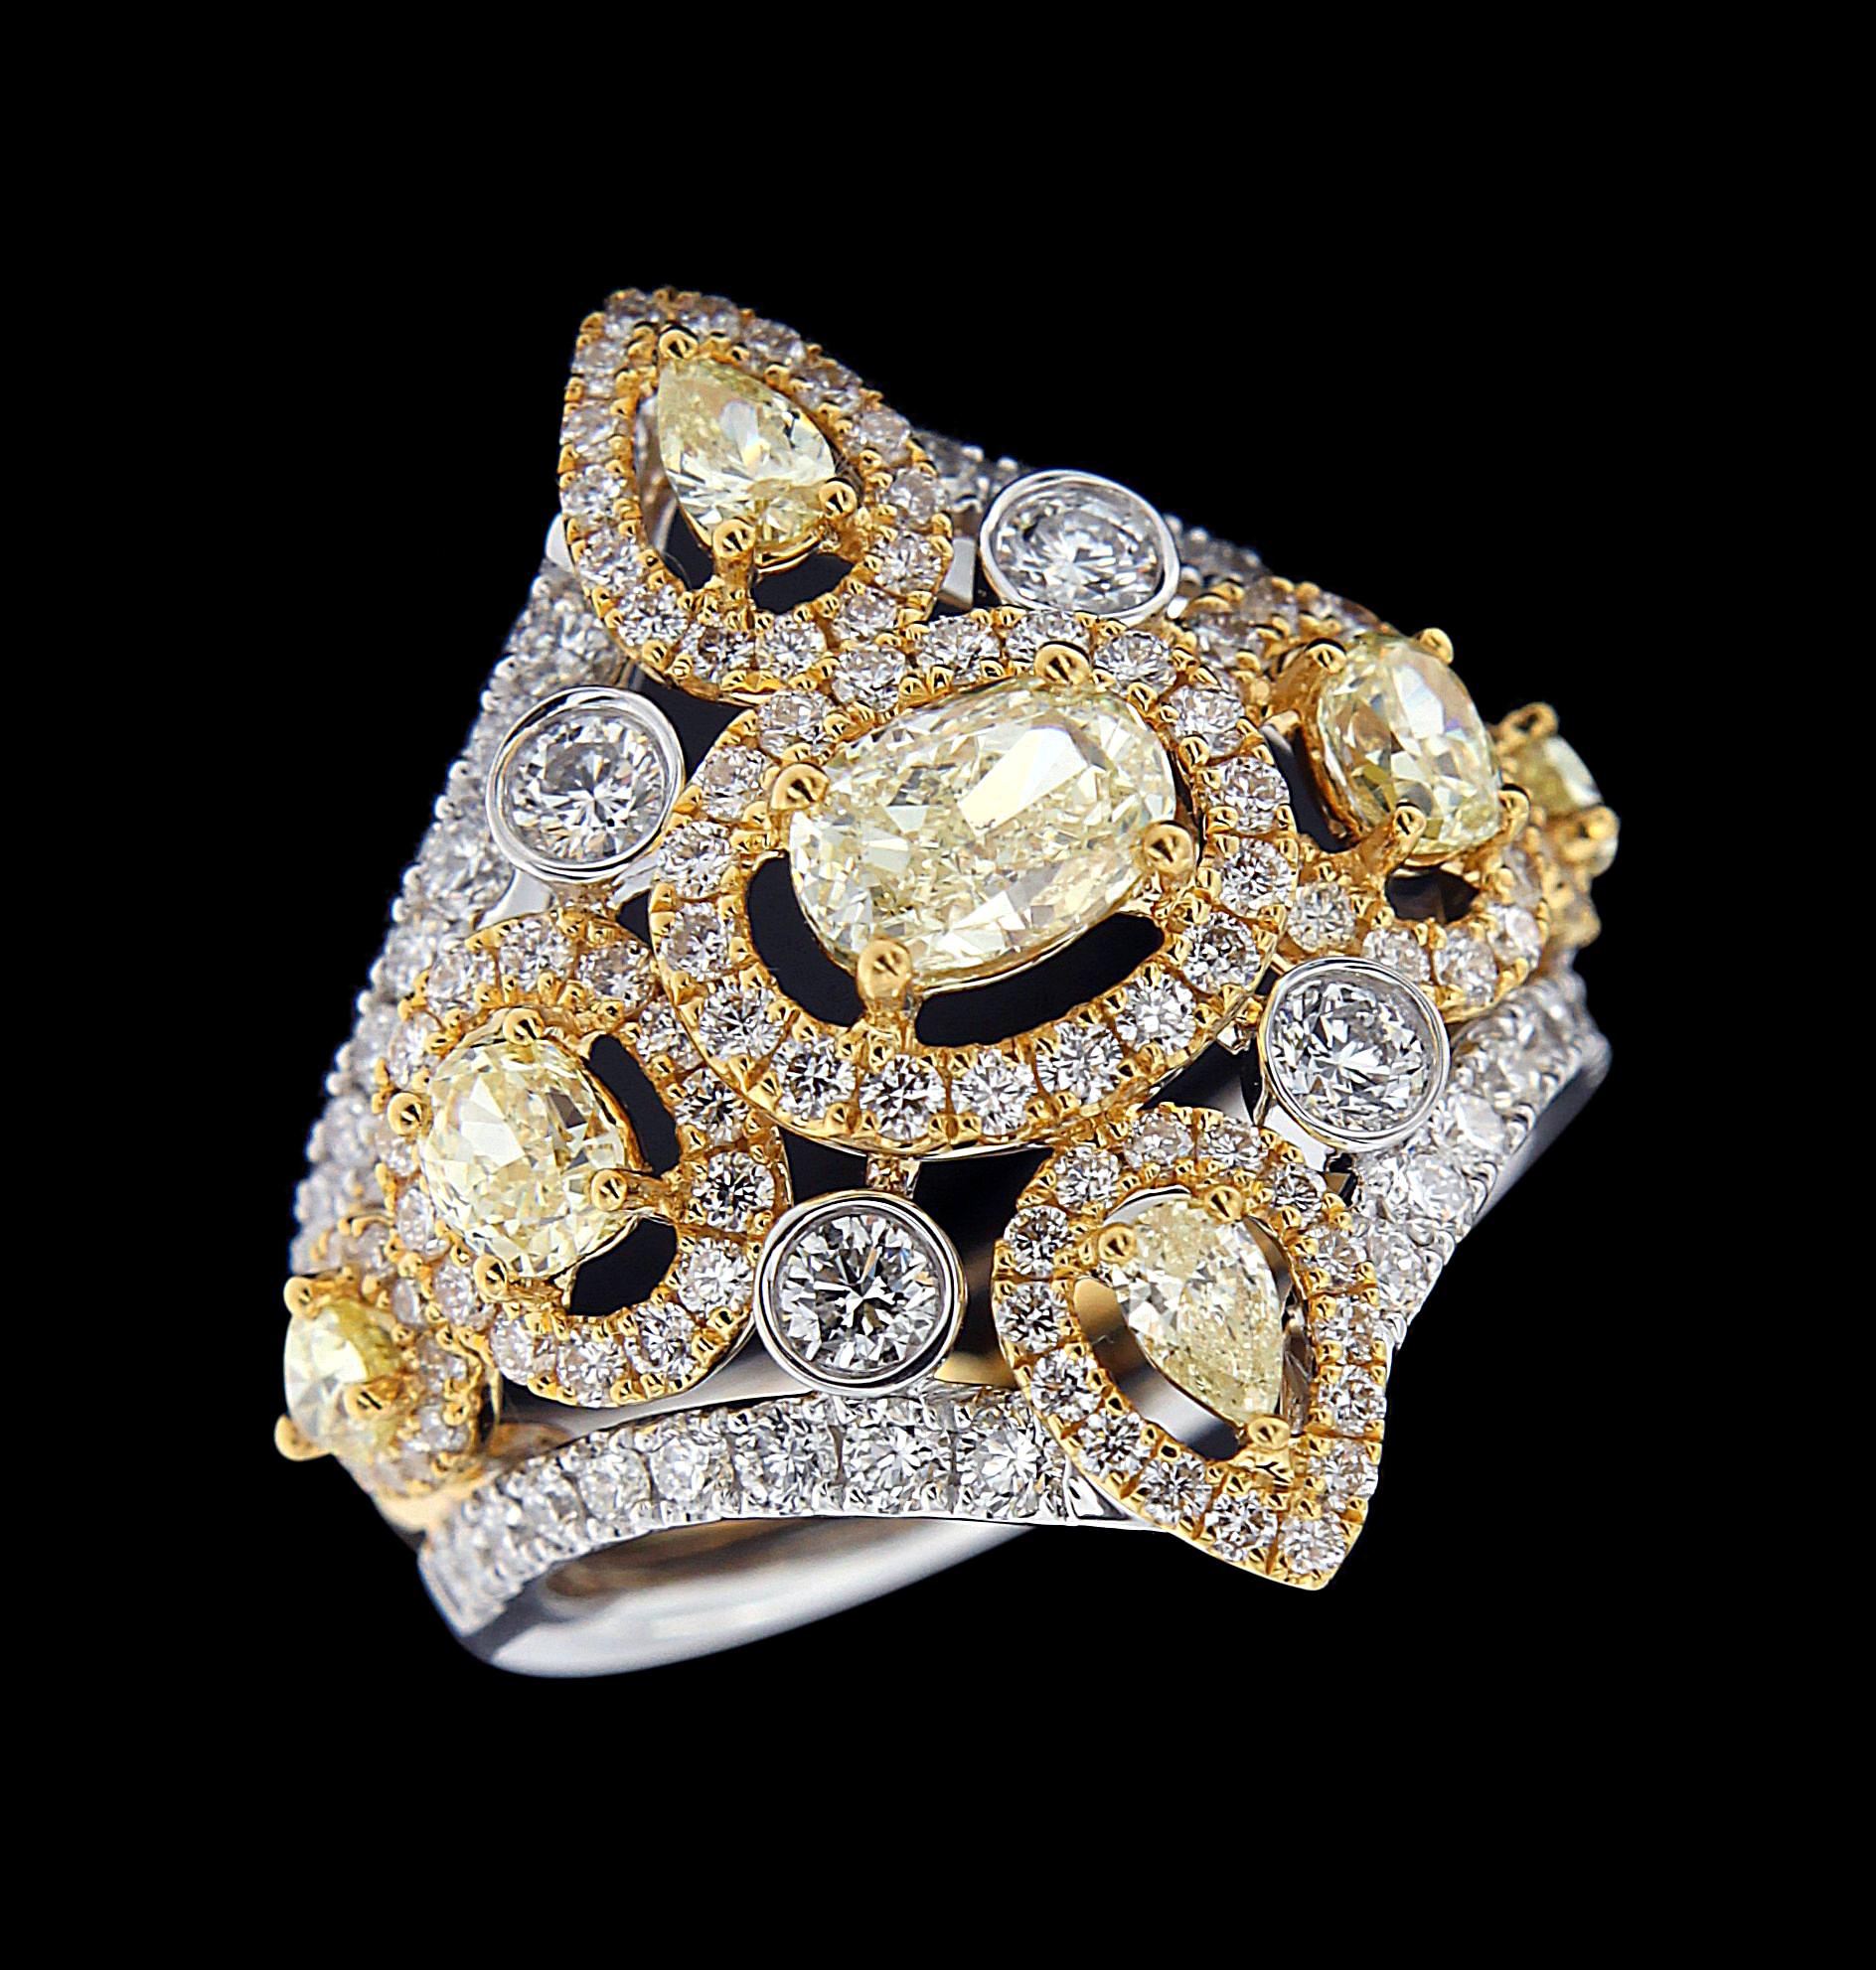 Oval Cut Magnificent 18 Karat White and Yellow Gold and Diamond Ring For Sale